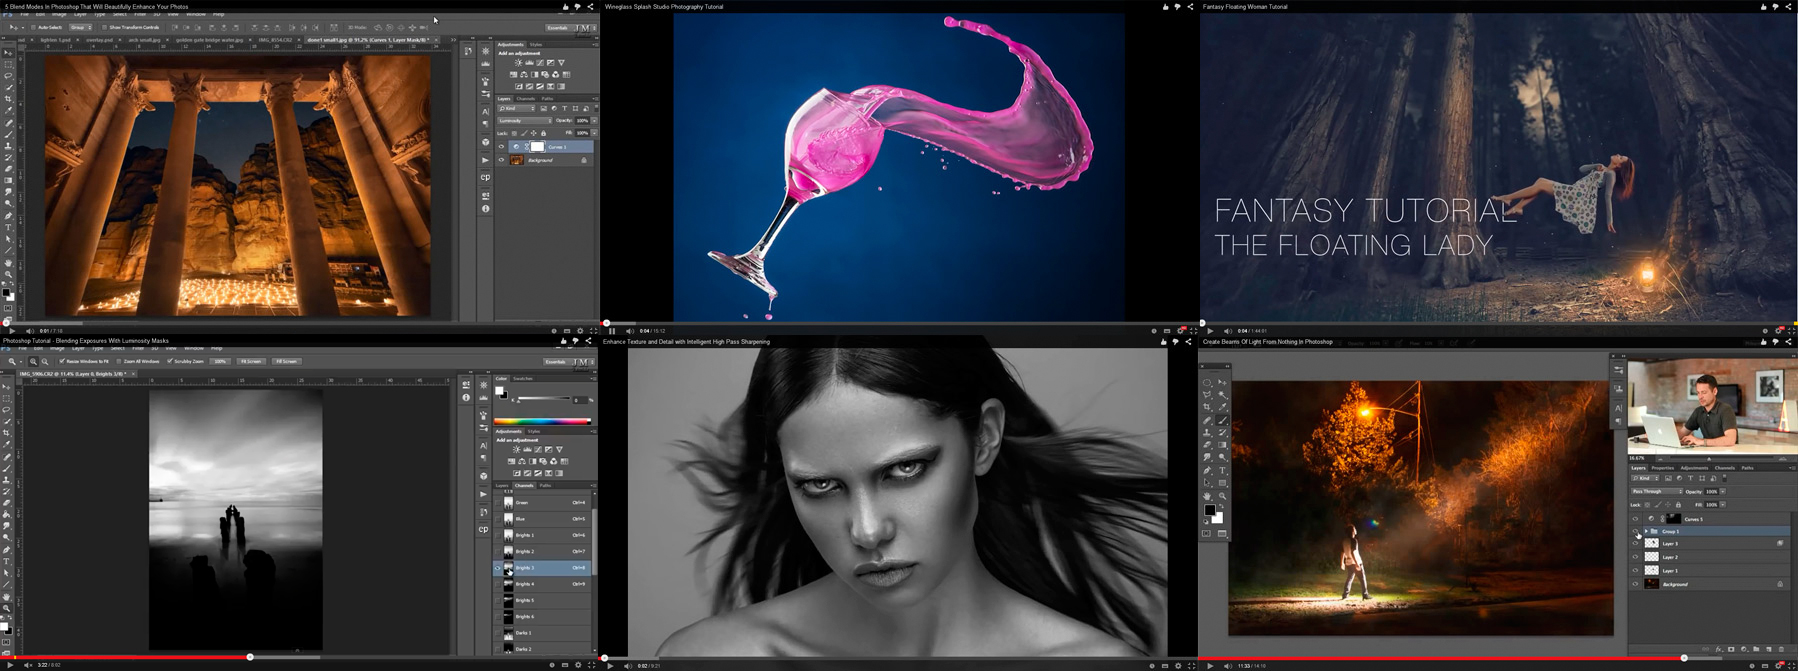 8 Awesome YouTube Tutorials Every Photographer Should See